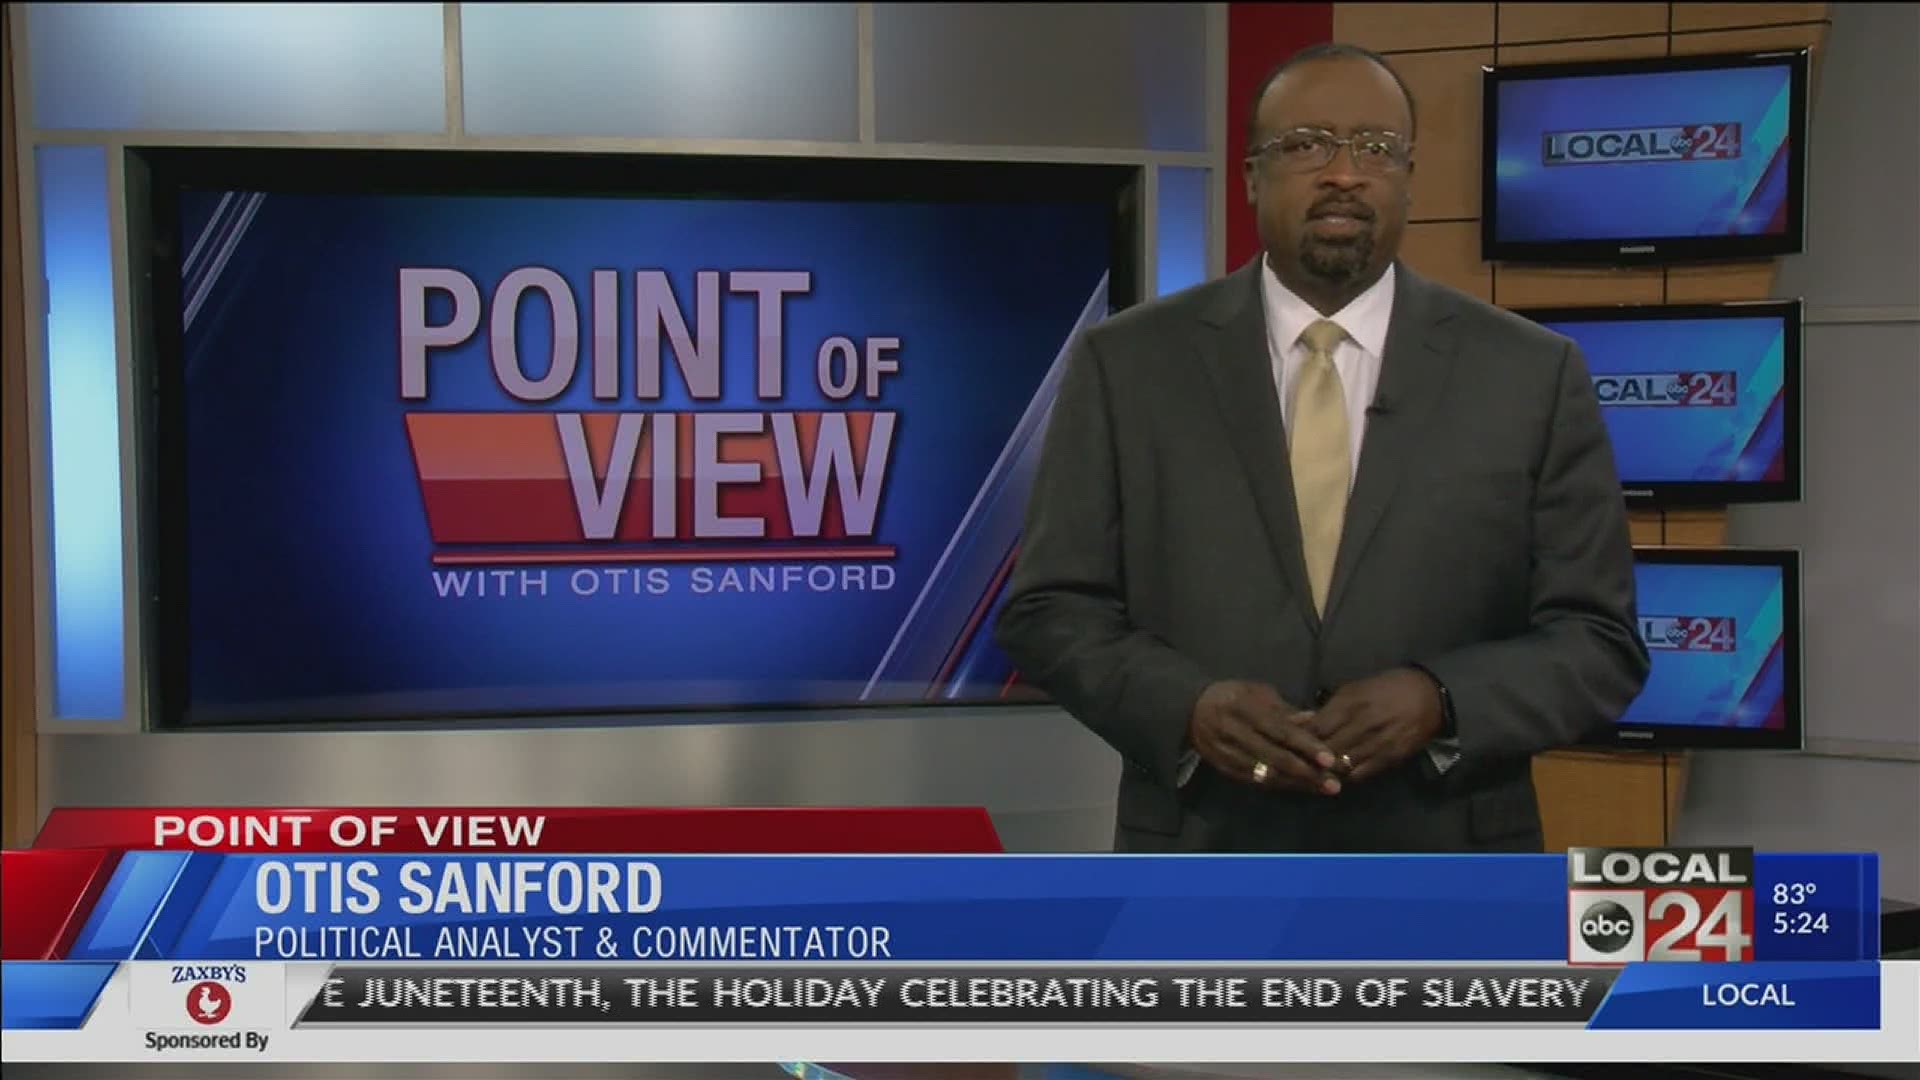 Local 24 News political analyst Otis Sanford shares his point of view on calls for change amid concerns over racism.